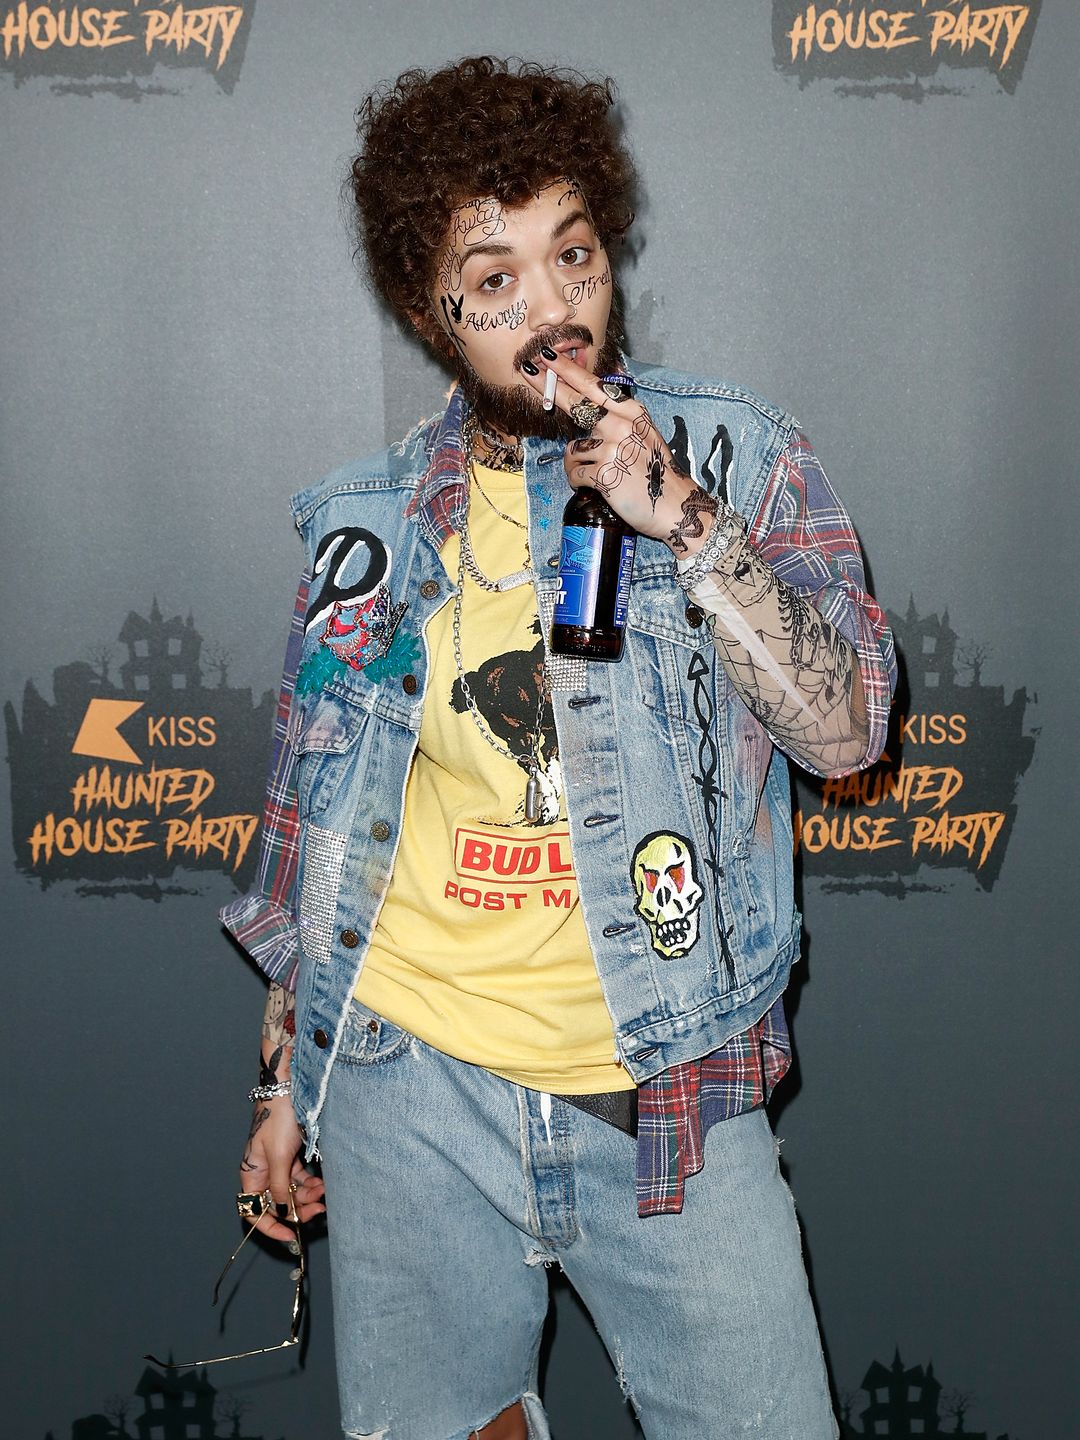 Rita Ora went hard on the accessories in 2018 when she dressed as rapper Post Malone